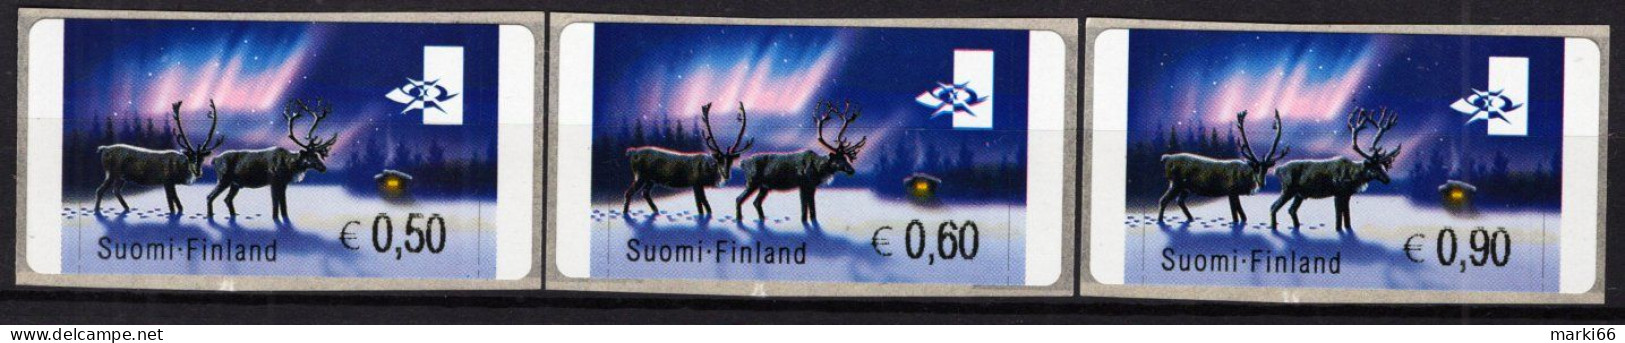 Finland - 2002 - Christmas - Northern Lights And Reindeers - Mint ATM Self-adhesive Stamp Set (EUR) - Machine Labels [ATM]